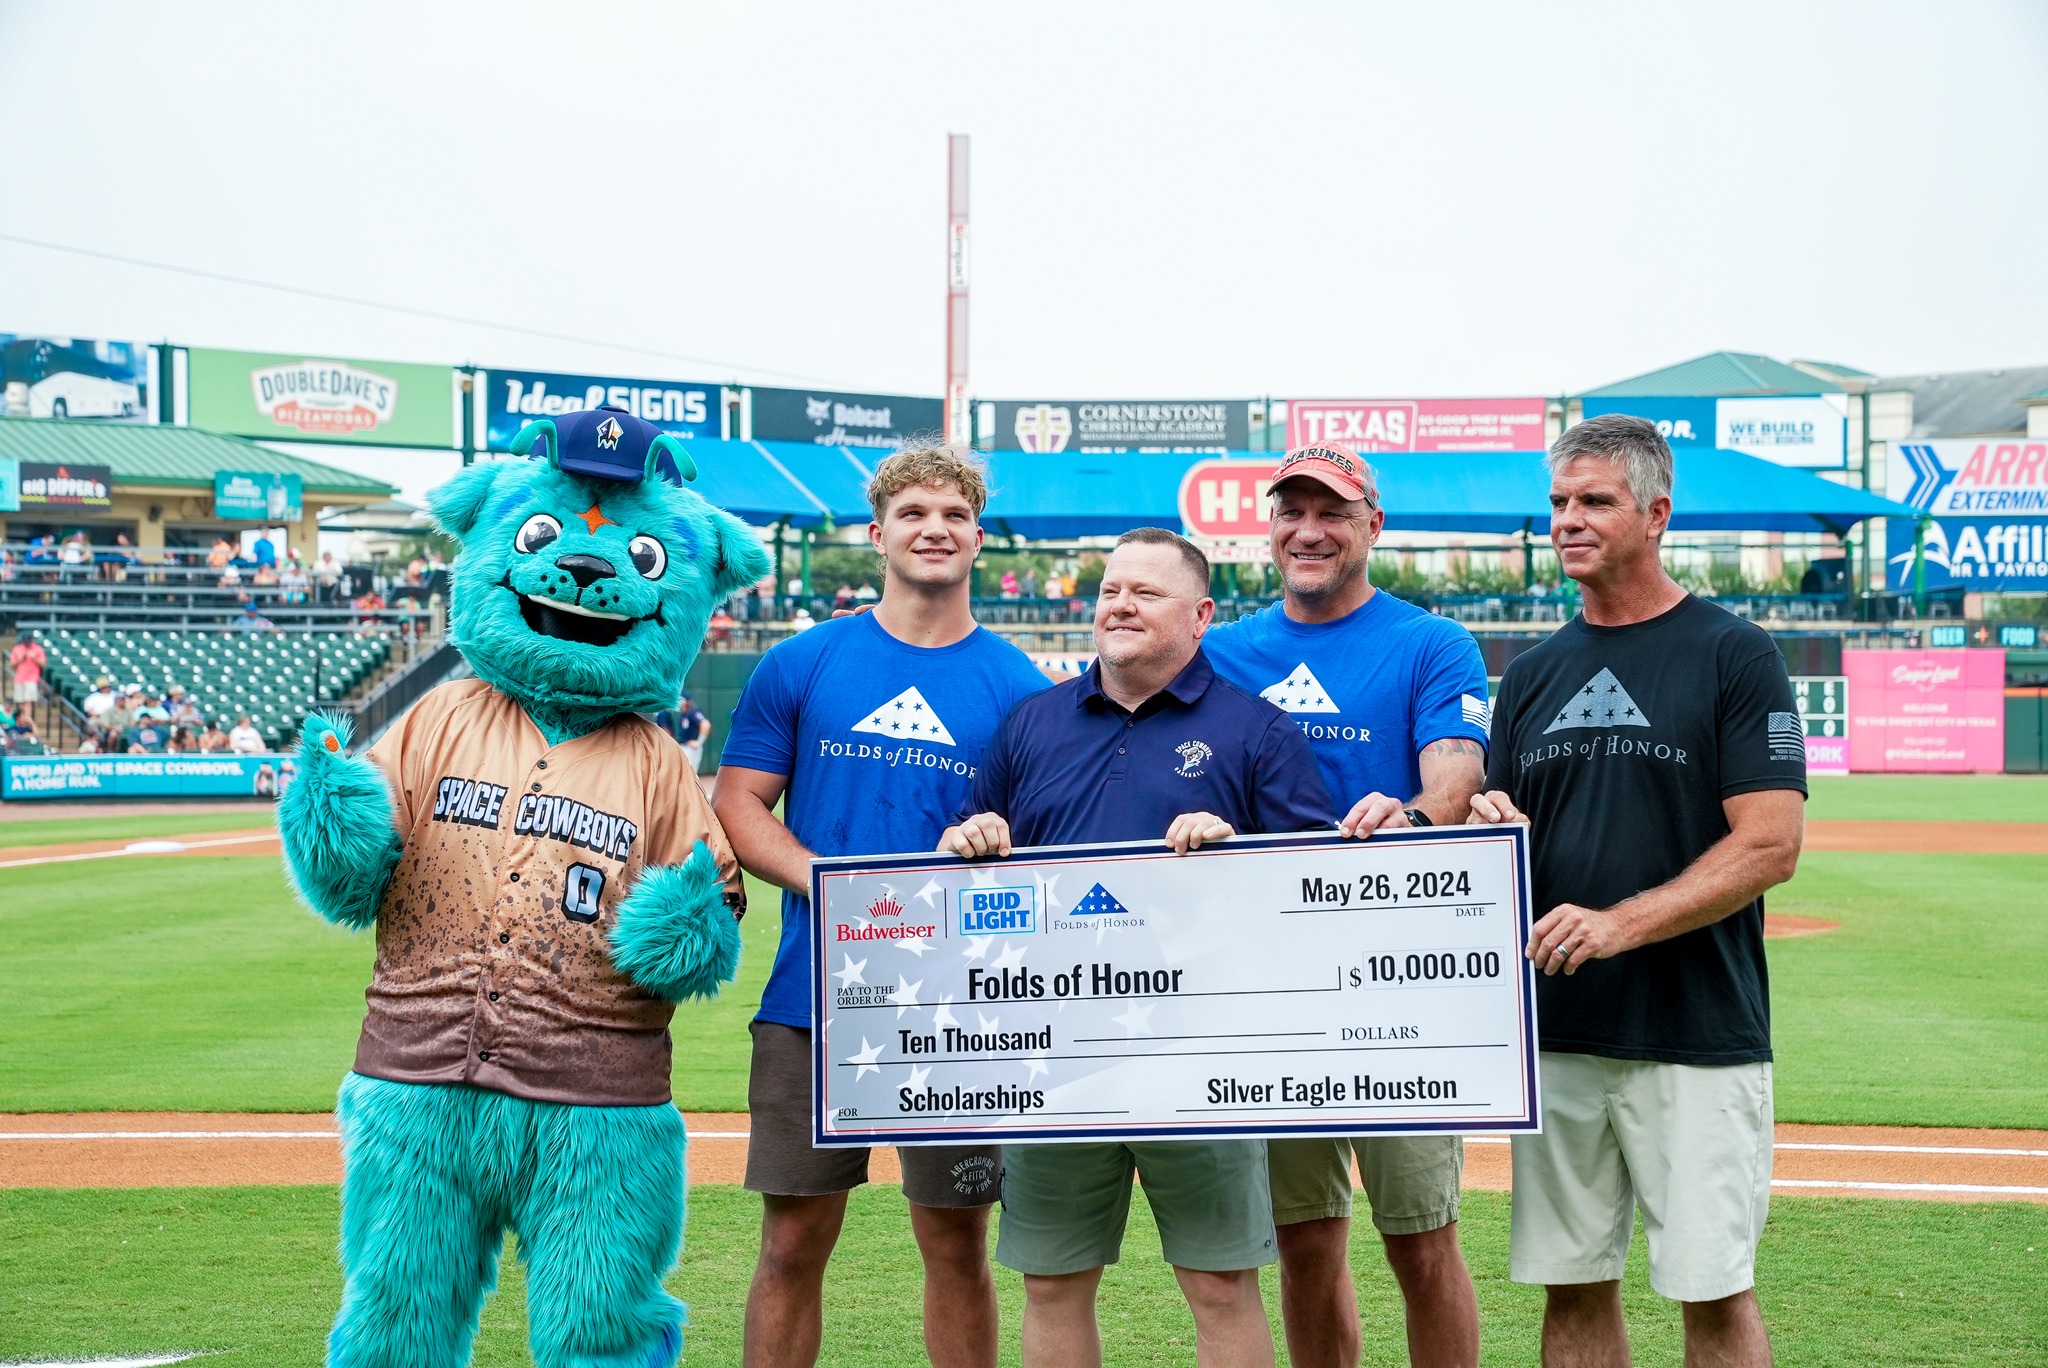 Bud Light and Silver Eagle Distributors Donate $10,000 to Folds of Honor at Sugar Land Space Cowboys Game